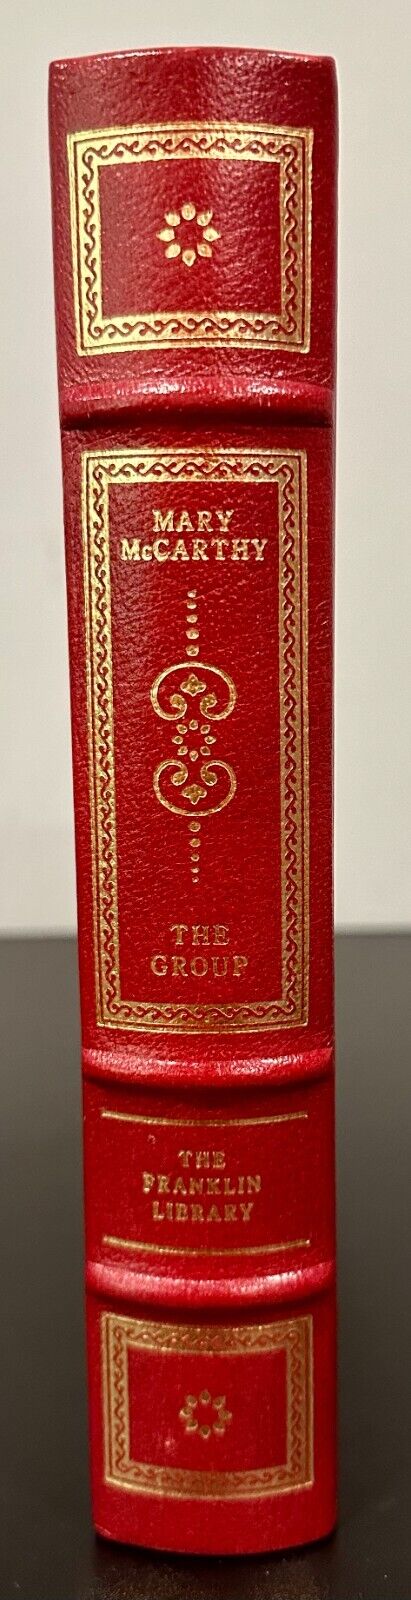 The Franklin Library - The Group by Mary McCarthy (Signed, Limited Edition)